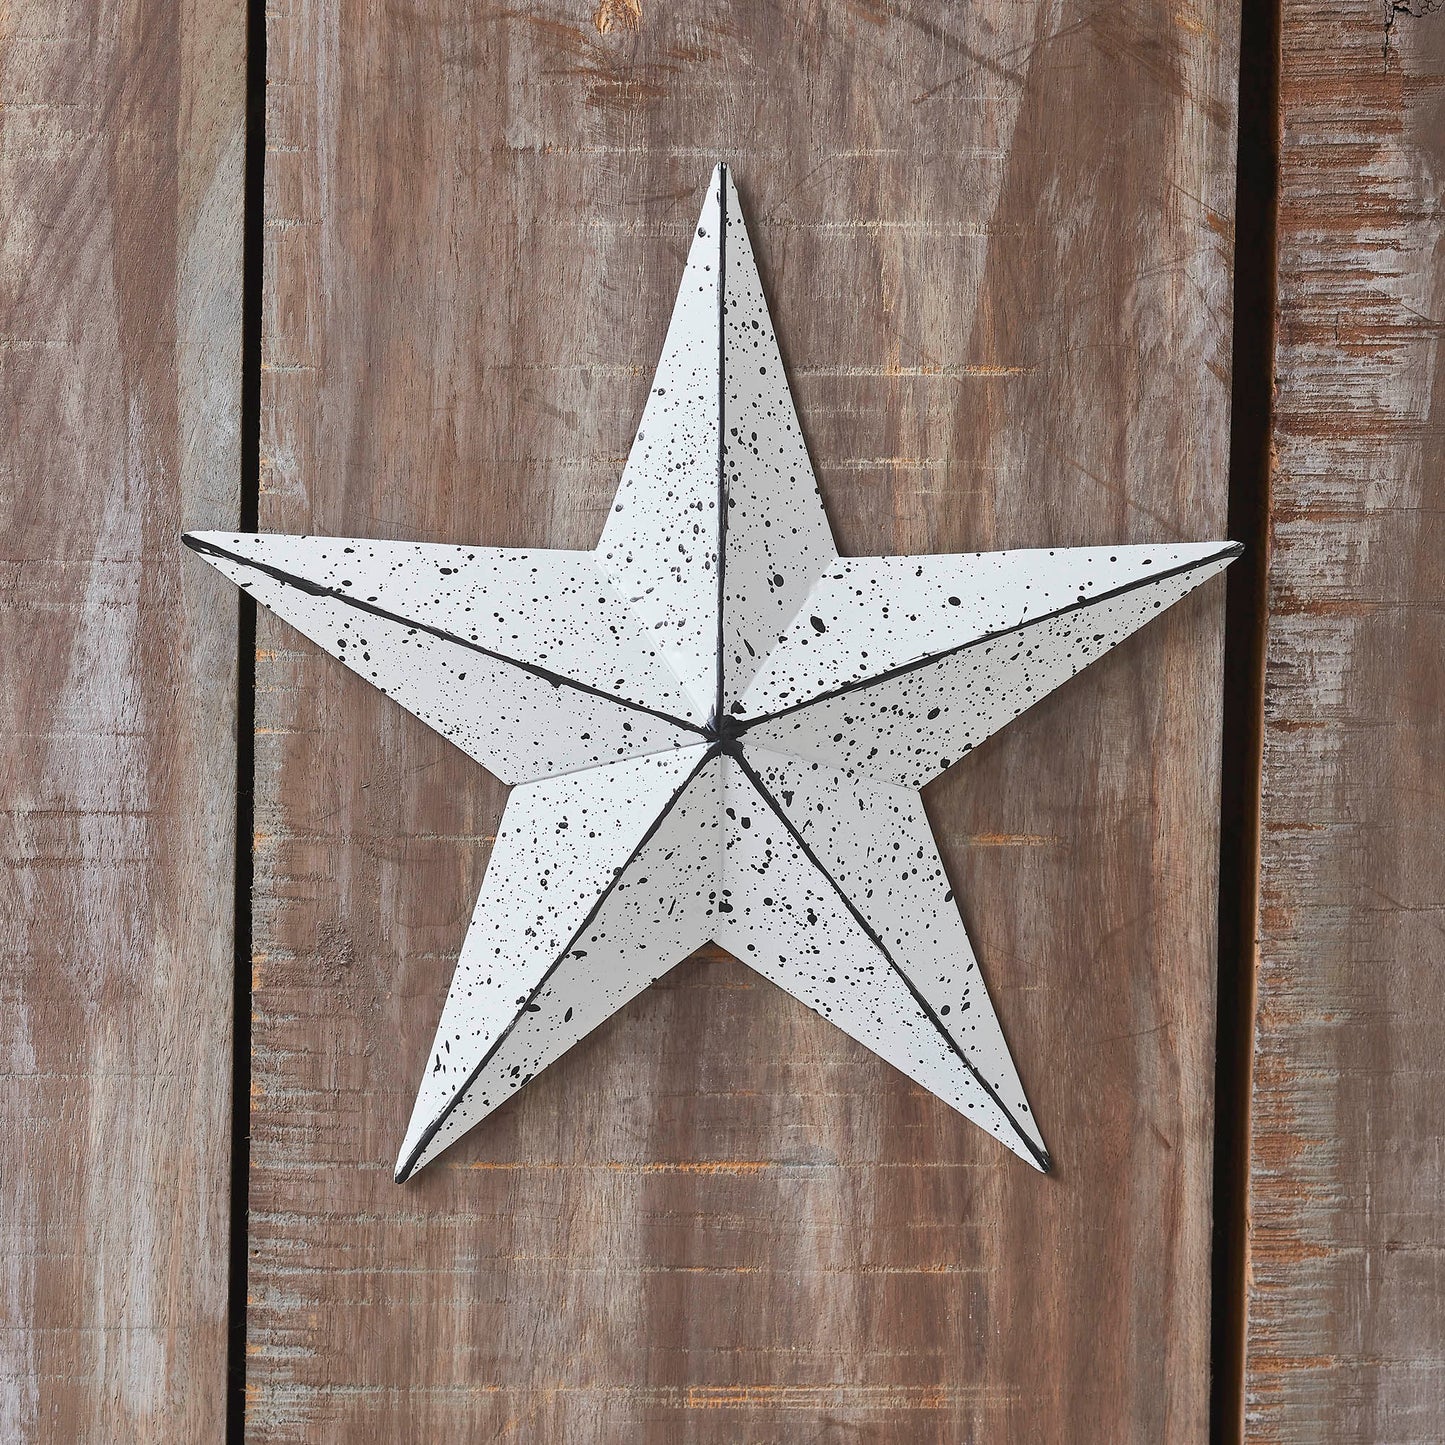 VHC Brands Patriotic Faceted Metal Star White Wall Hanging 8x8, Independence Day Decor, American Star Design, Distressed Appearance Metal Wall Hanging,  Star Shape, Country, Matte White